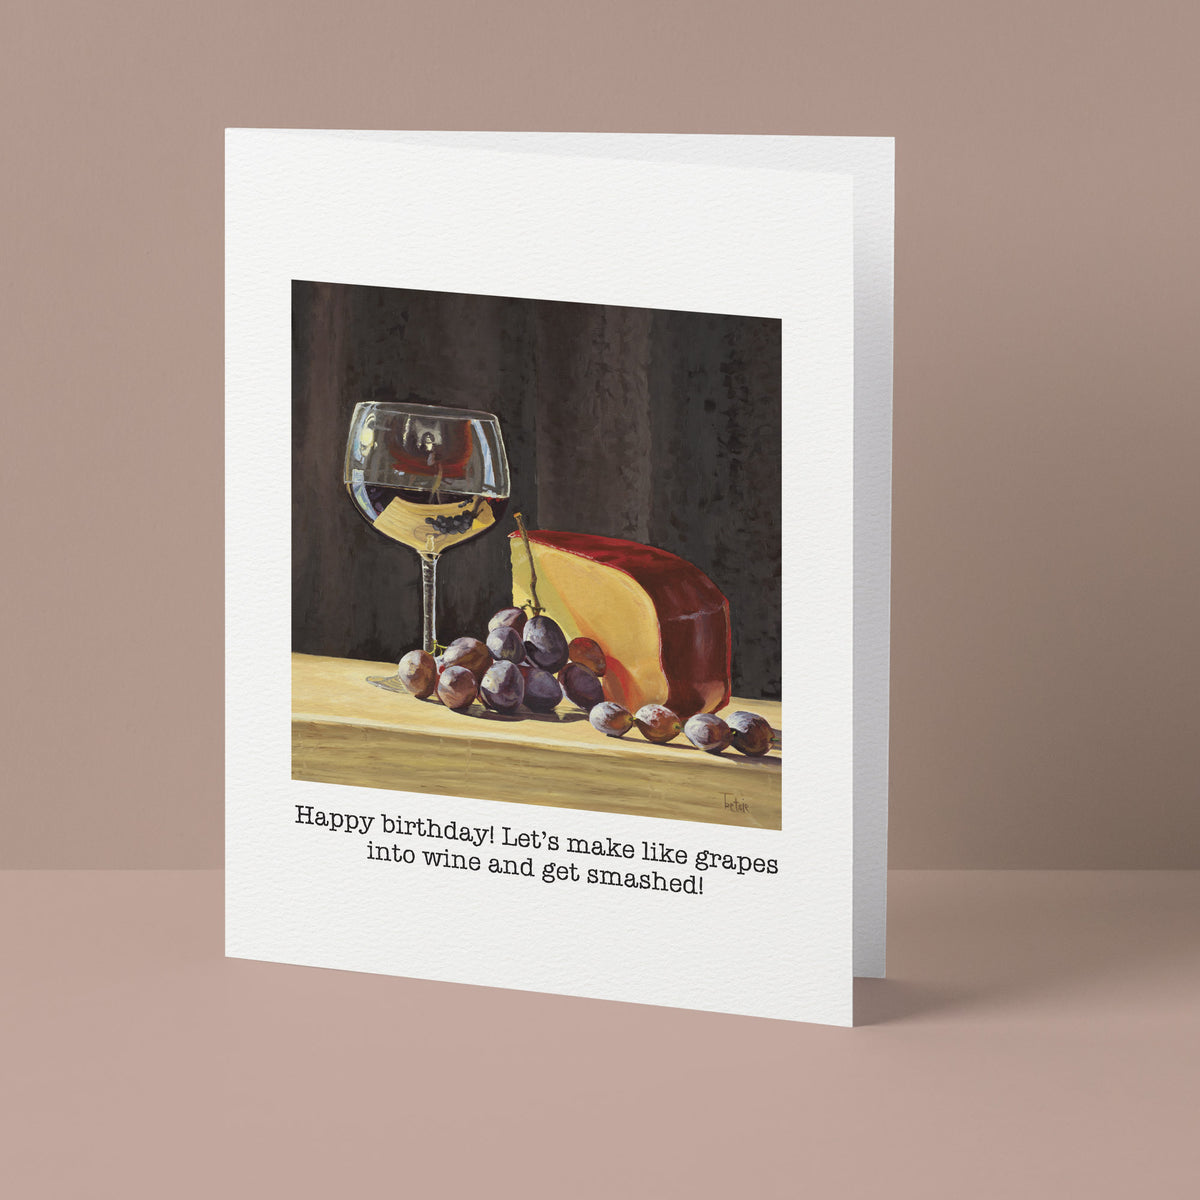 "Happy birthday! Let's make like grapes" Greeting Card